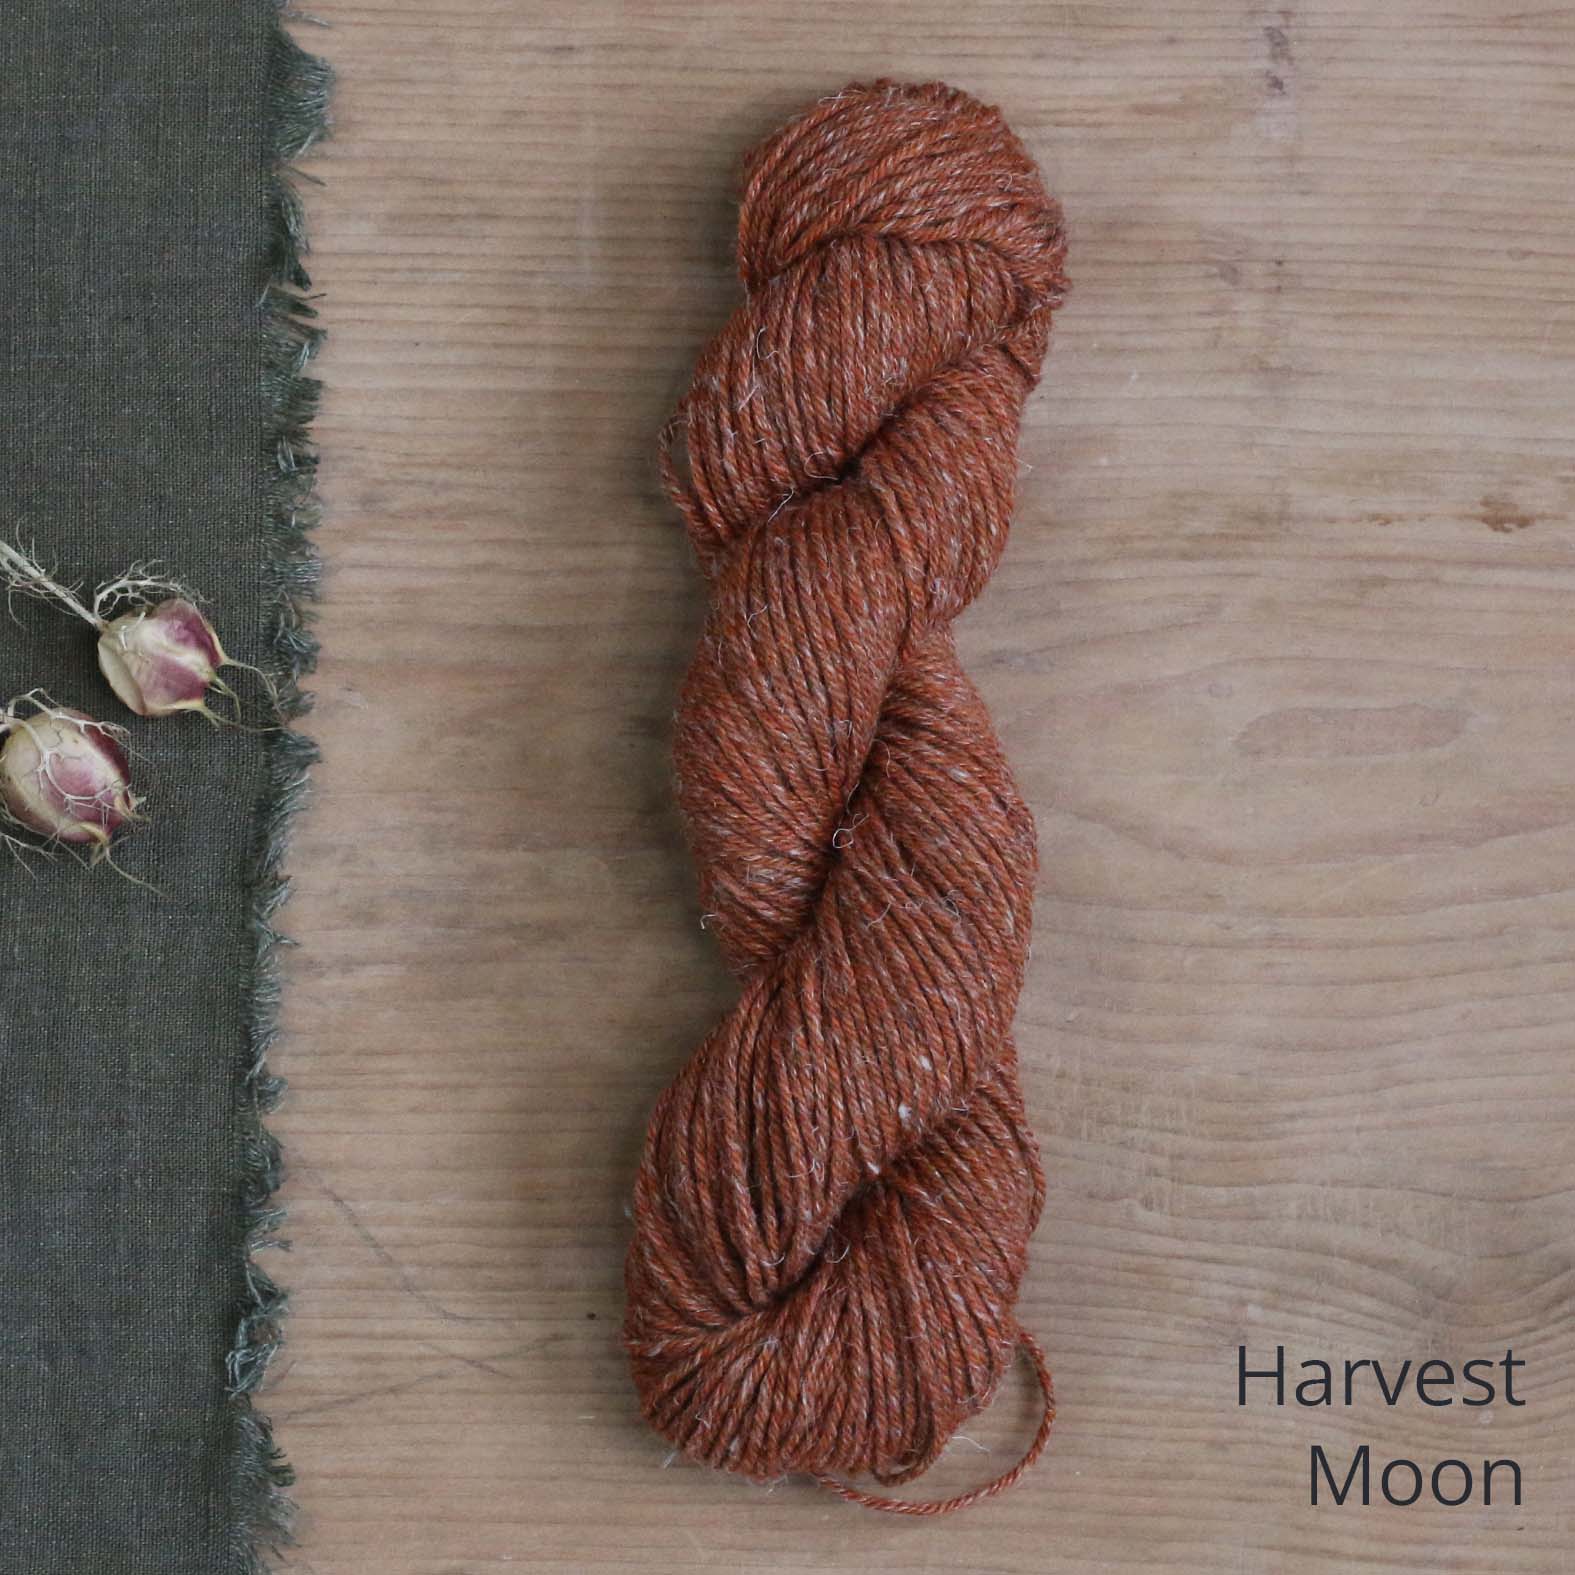 Wooden Macrame Accessories – the knit cafe